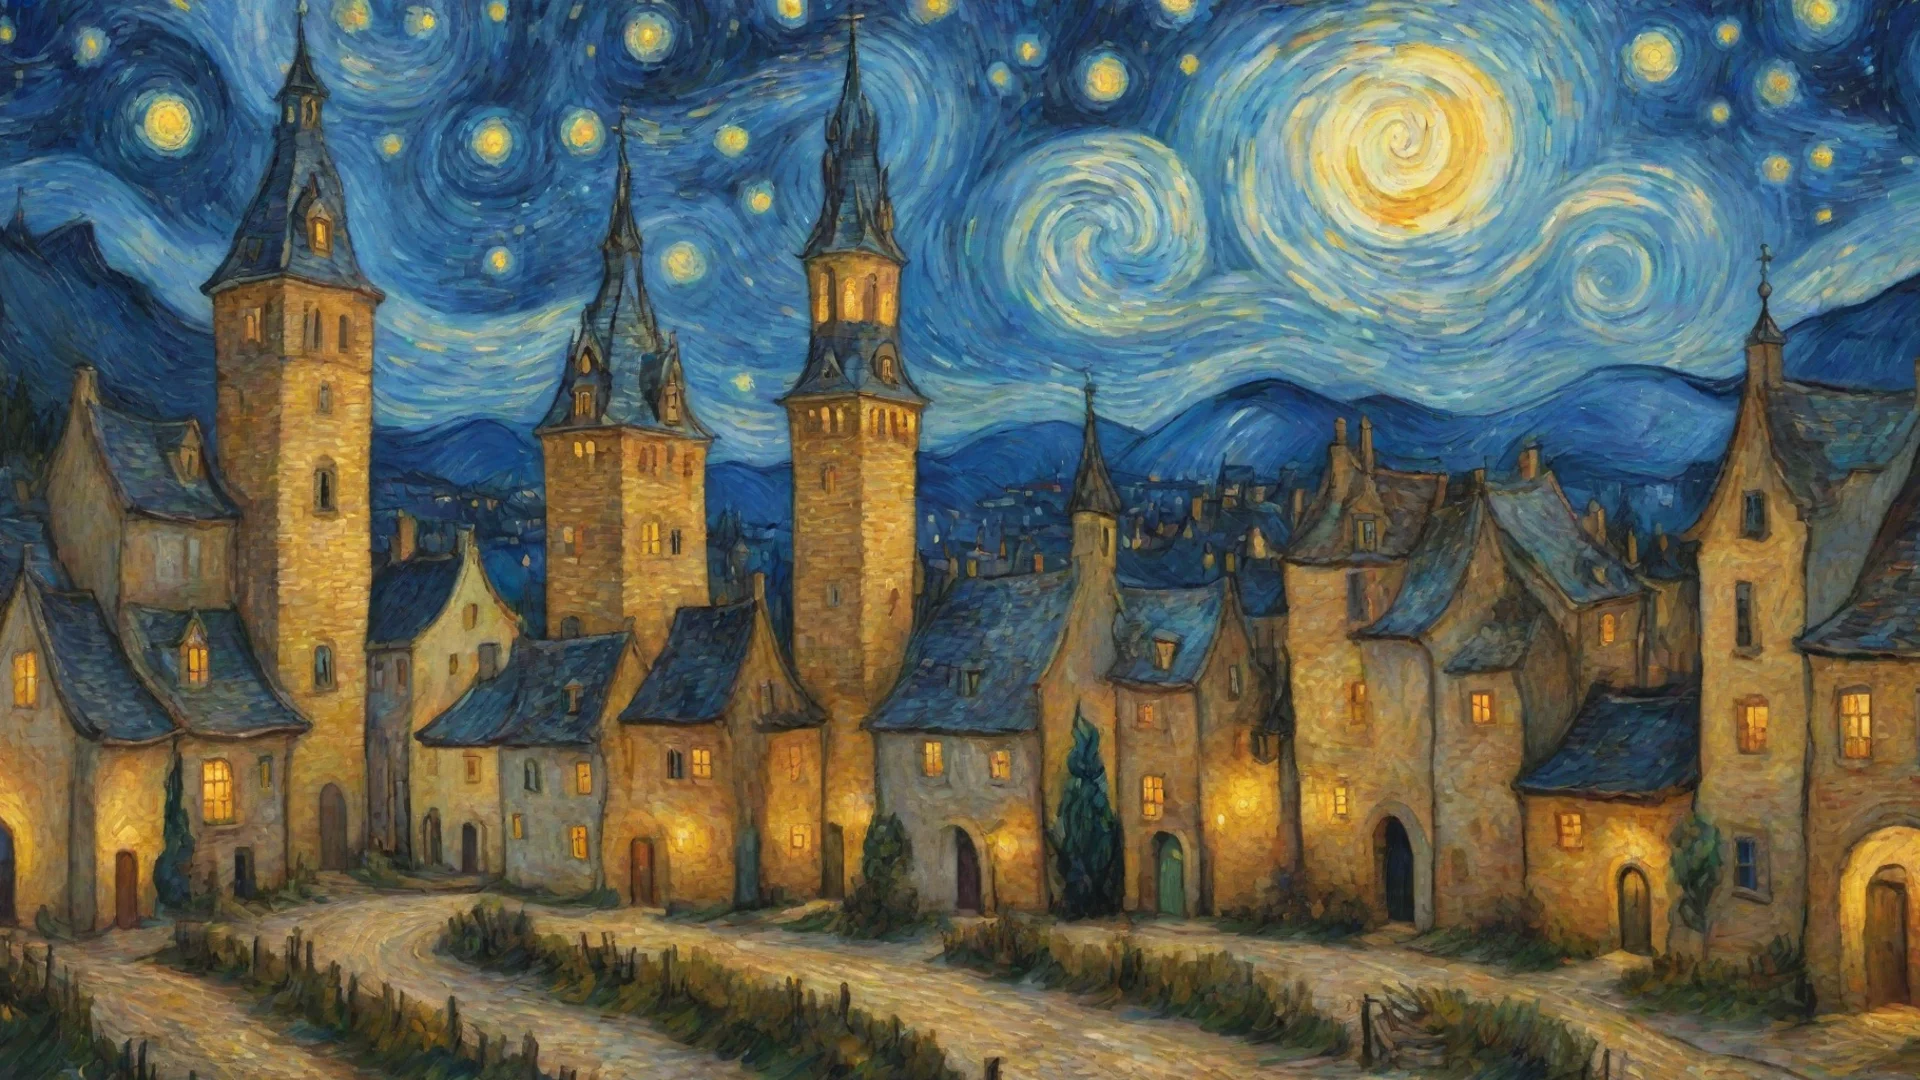 aiartstation art artistic van gogh village at night starry spiraling towers amazing hd aesthetic confident engaging wow 3 wide